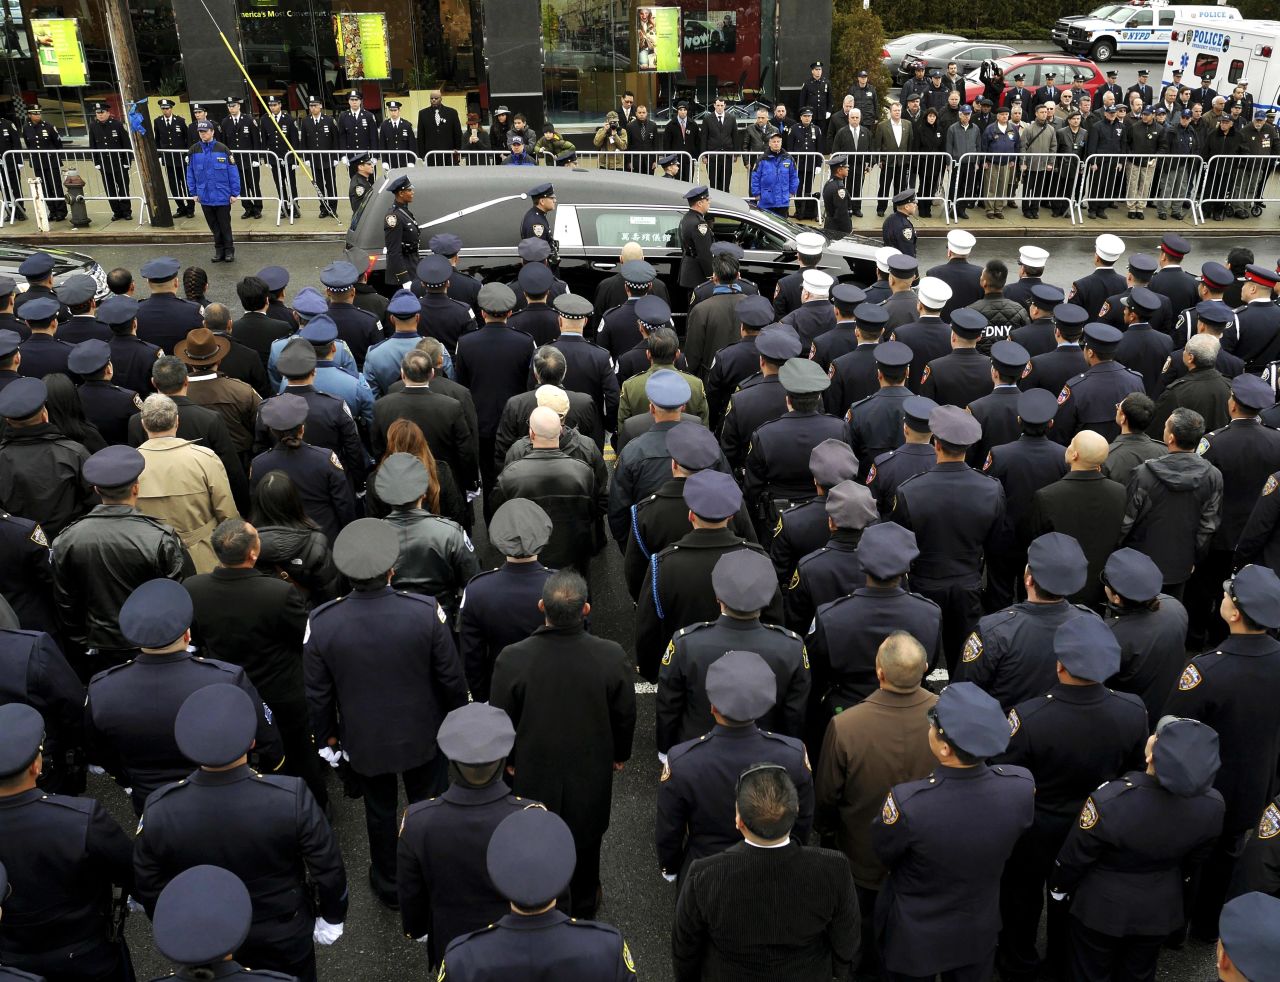 A hearse carrying the body of Officer Wenjian Liu passes by police officers in formation after his funeral in Brooklyn, New York, on Sunday, January 4.